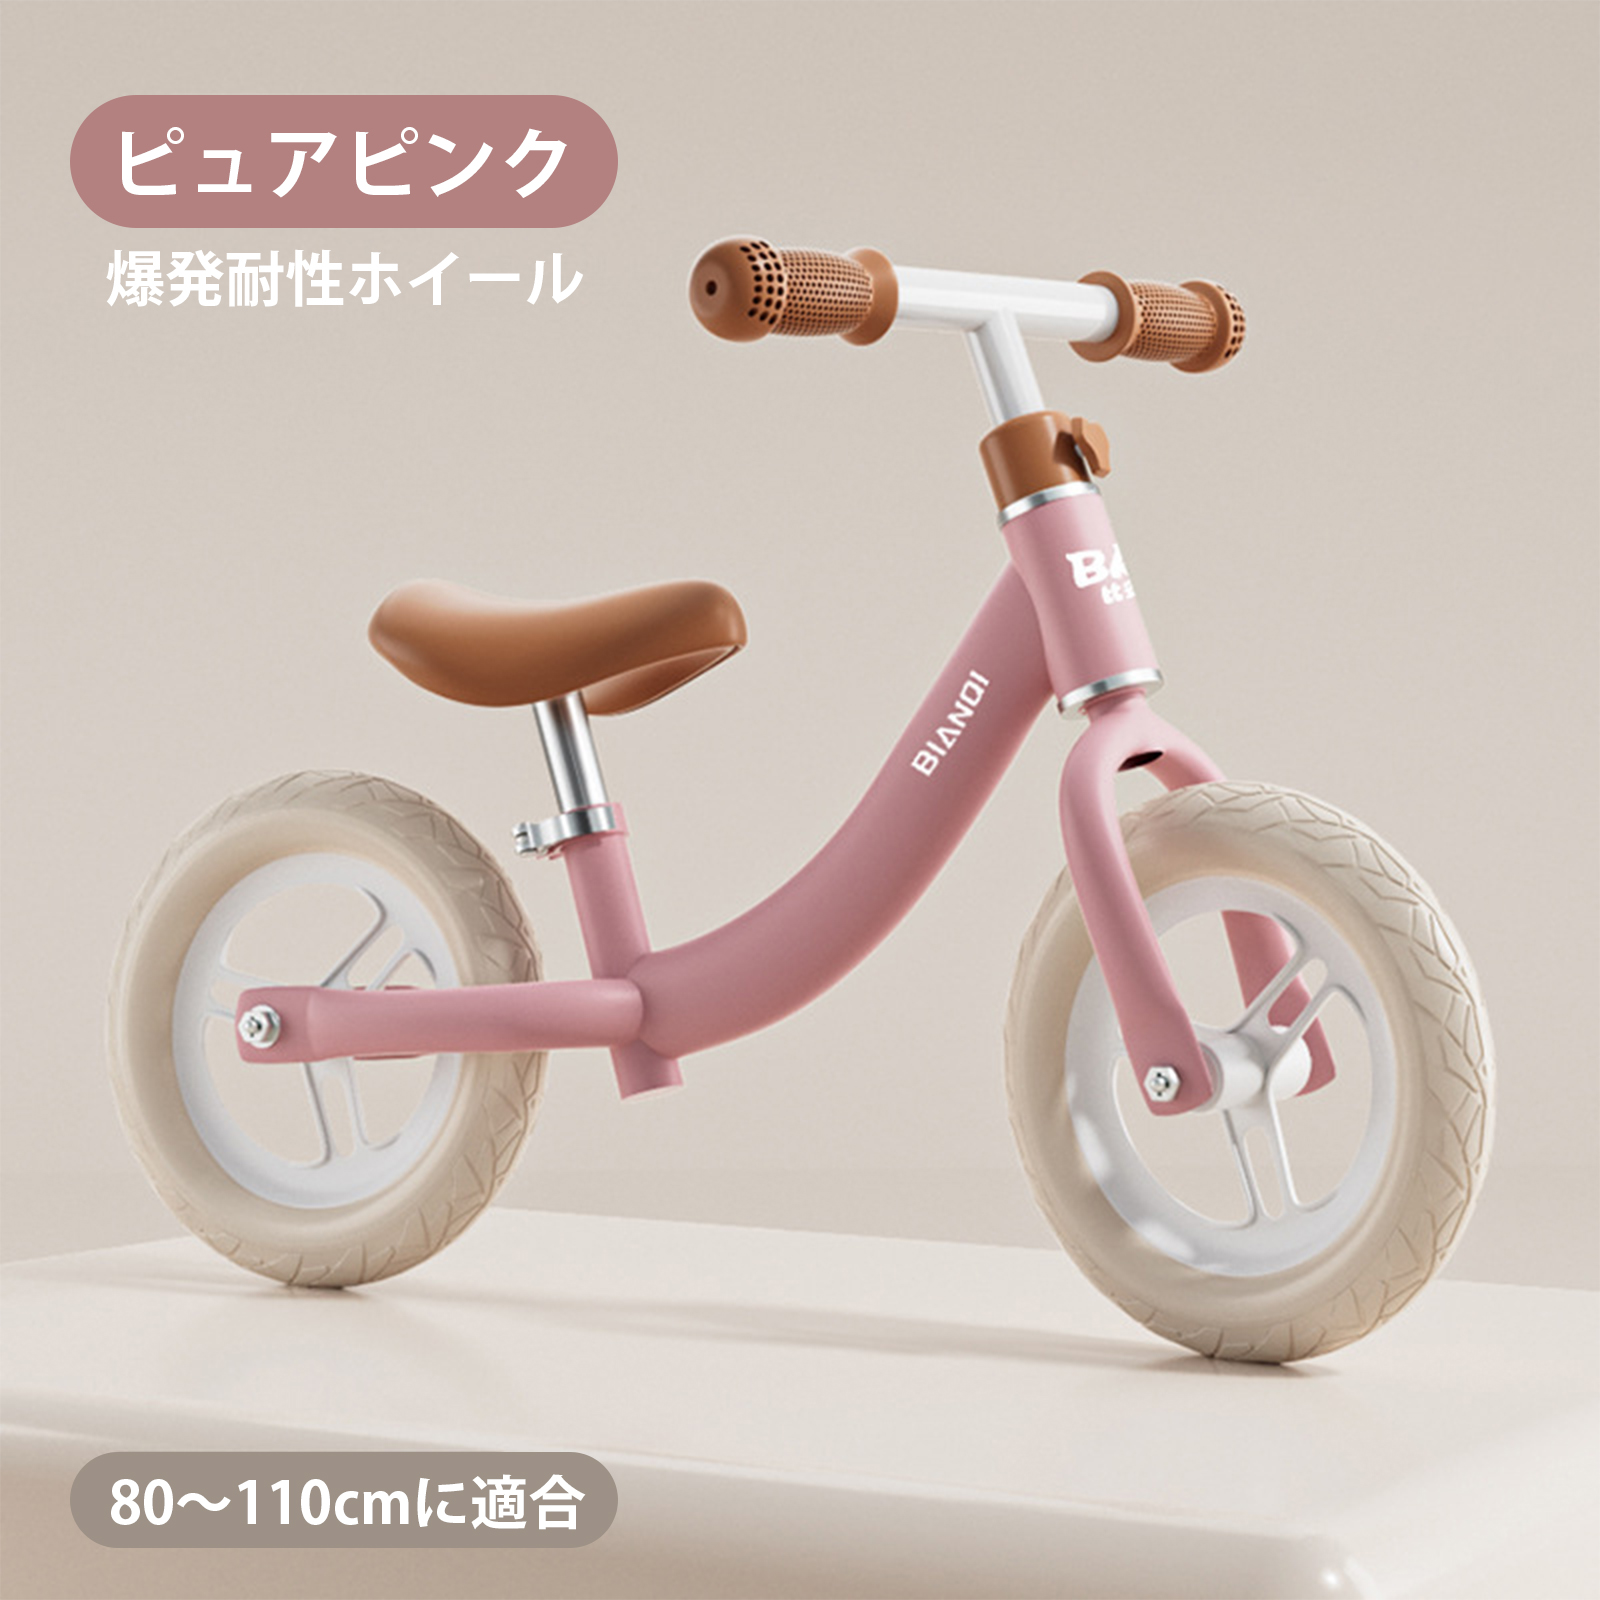 T12 Princess Pink (Explosion-proof wheels free of inflation)